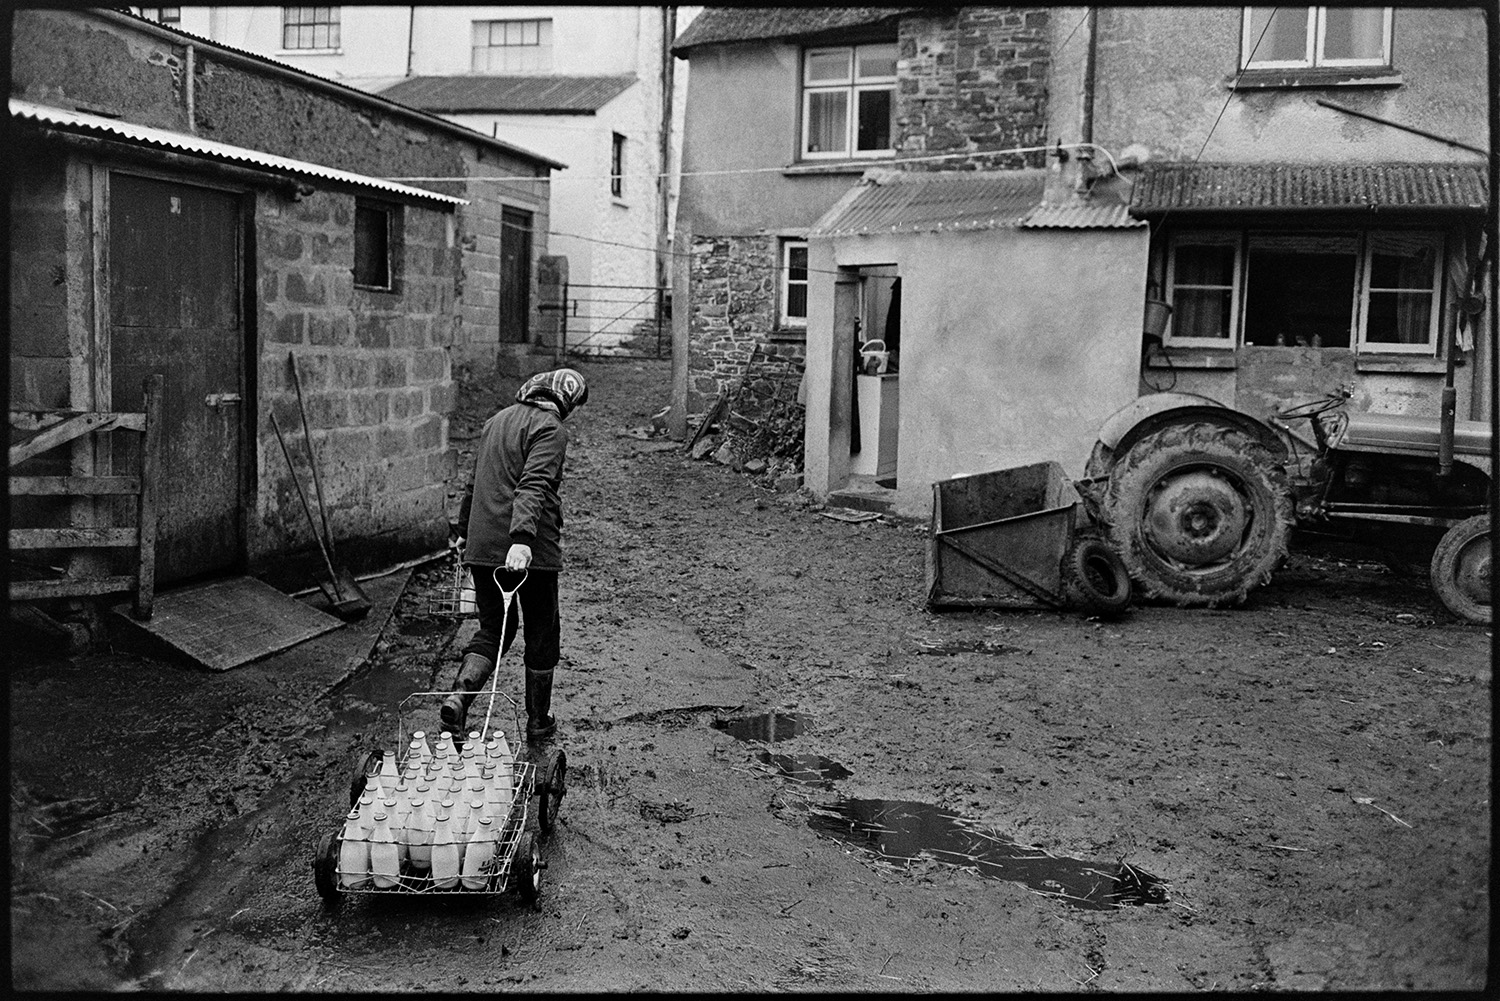 Woman delivering milk round village. <br /> [Jane Woolacott setting off from the farmyard at Verdun, Atherington to deliver milk around the village. She is pulling a trolley full of milk bottles.]